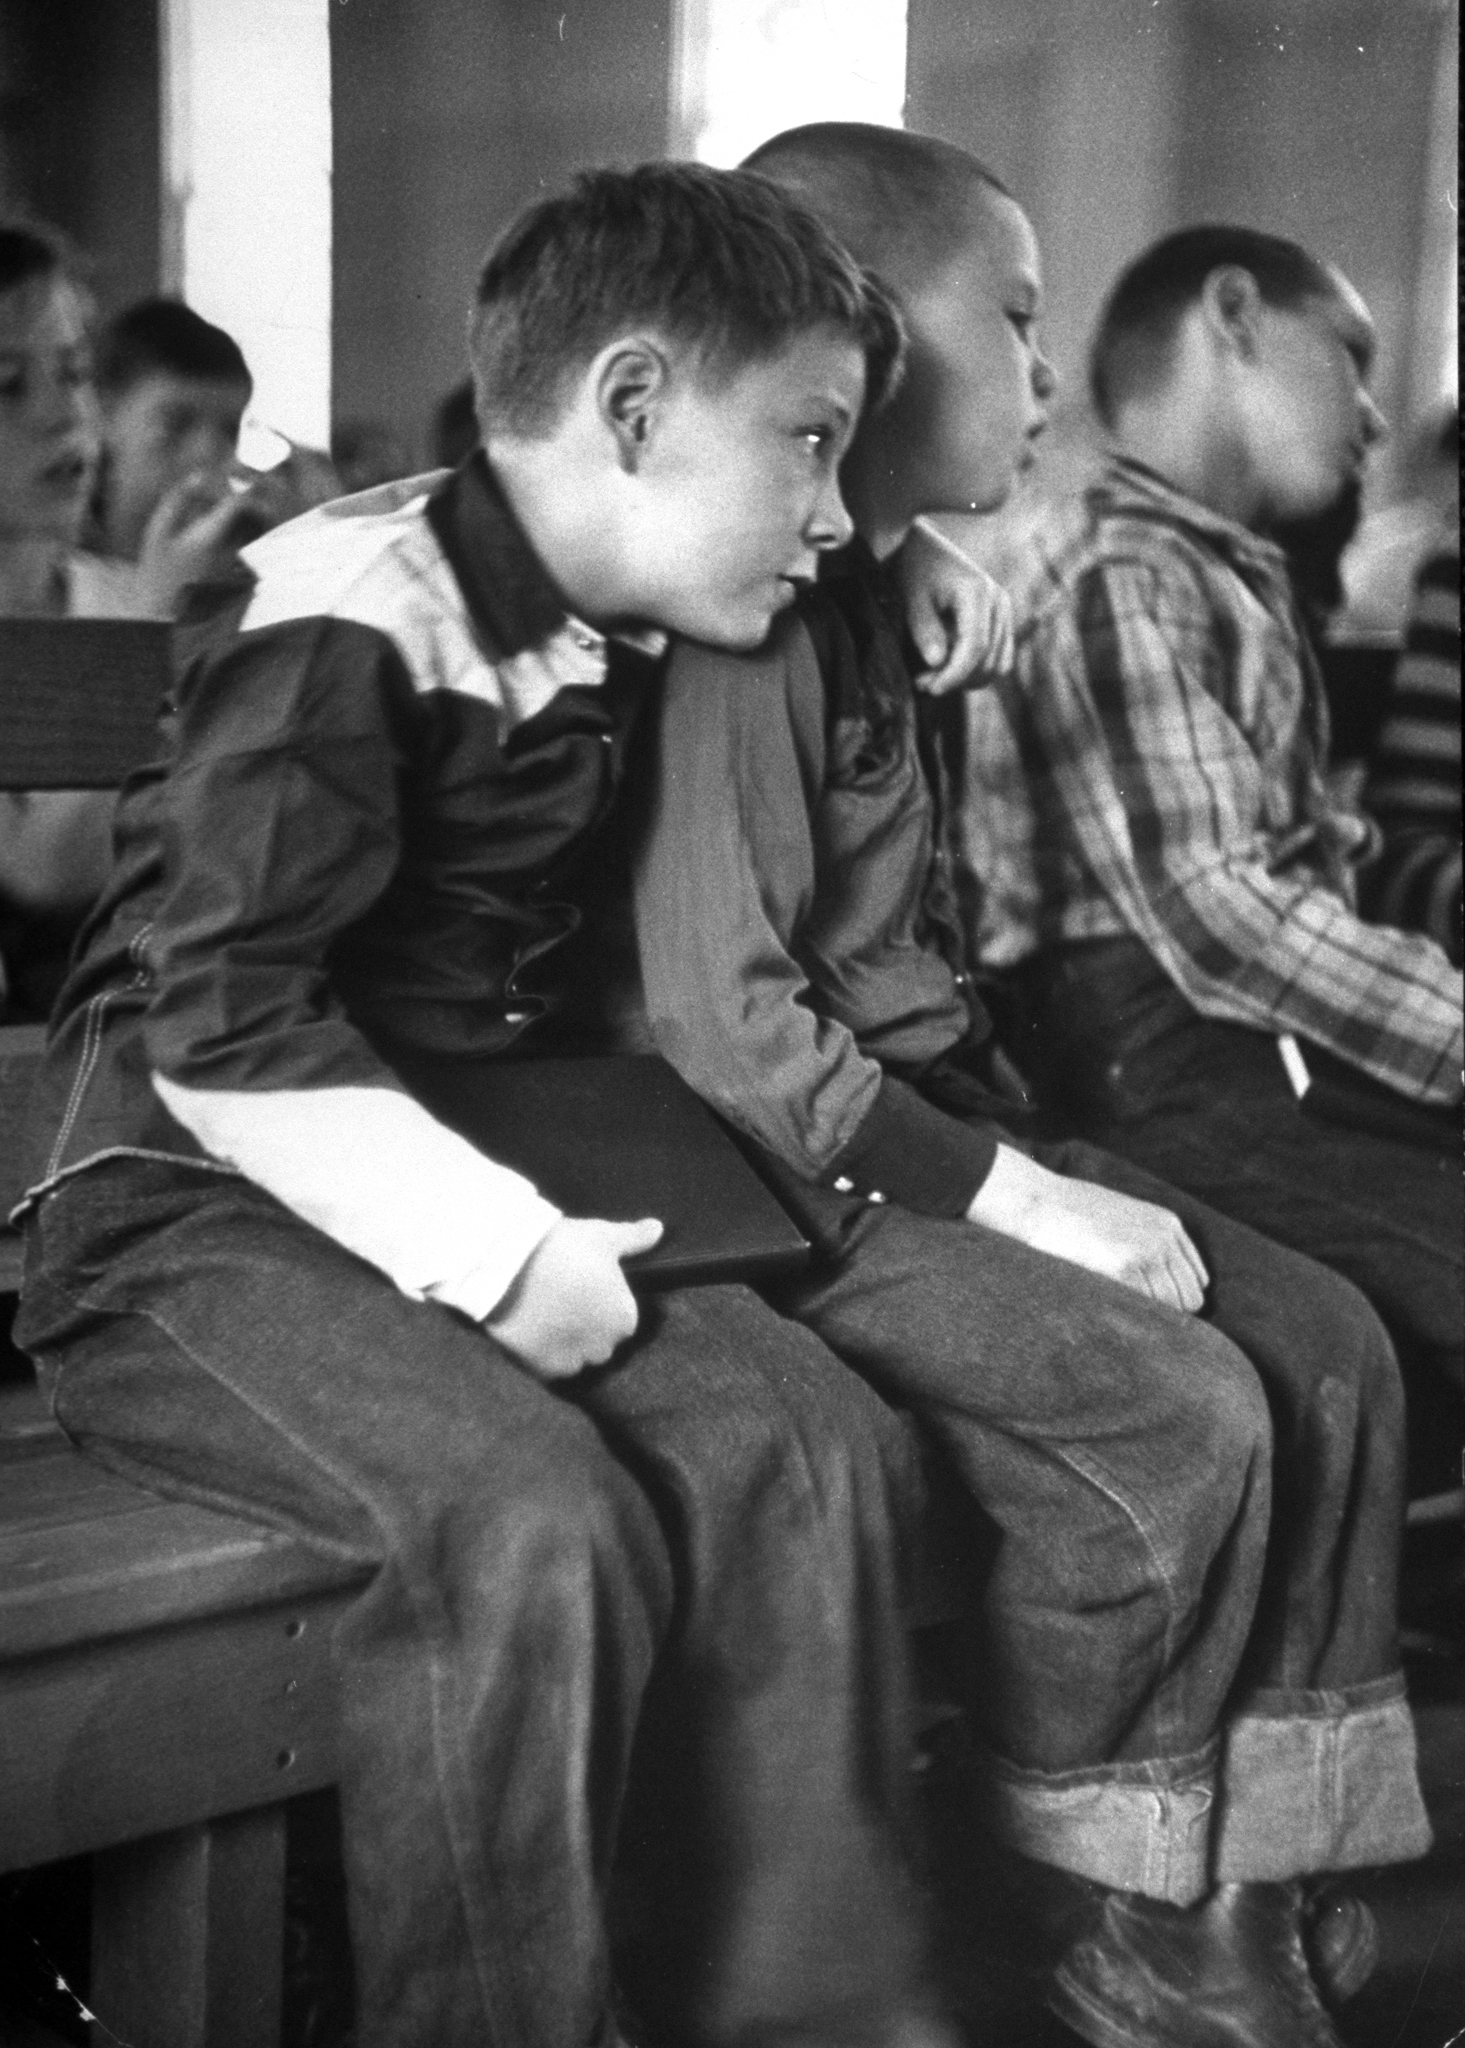 Young Richard Dale (L) beginning to adjust to his new environment when he finds a new friend, Ernest, during chapel services at boy's ranch.